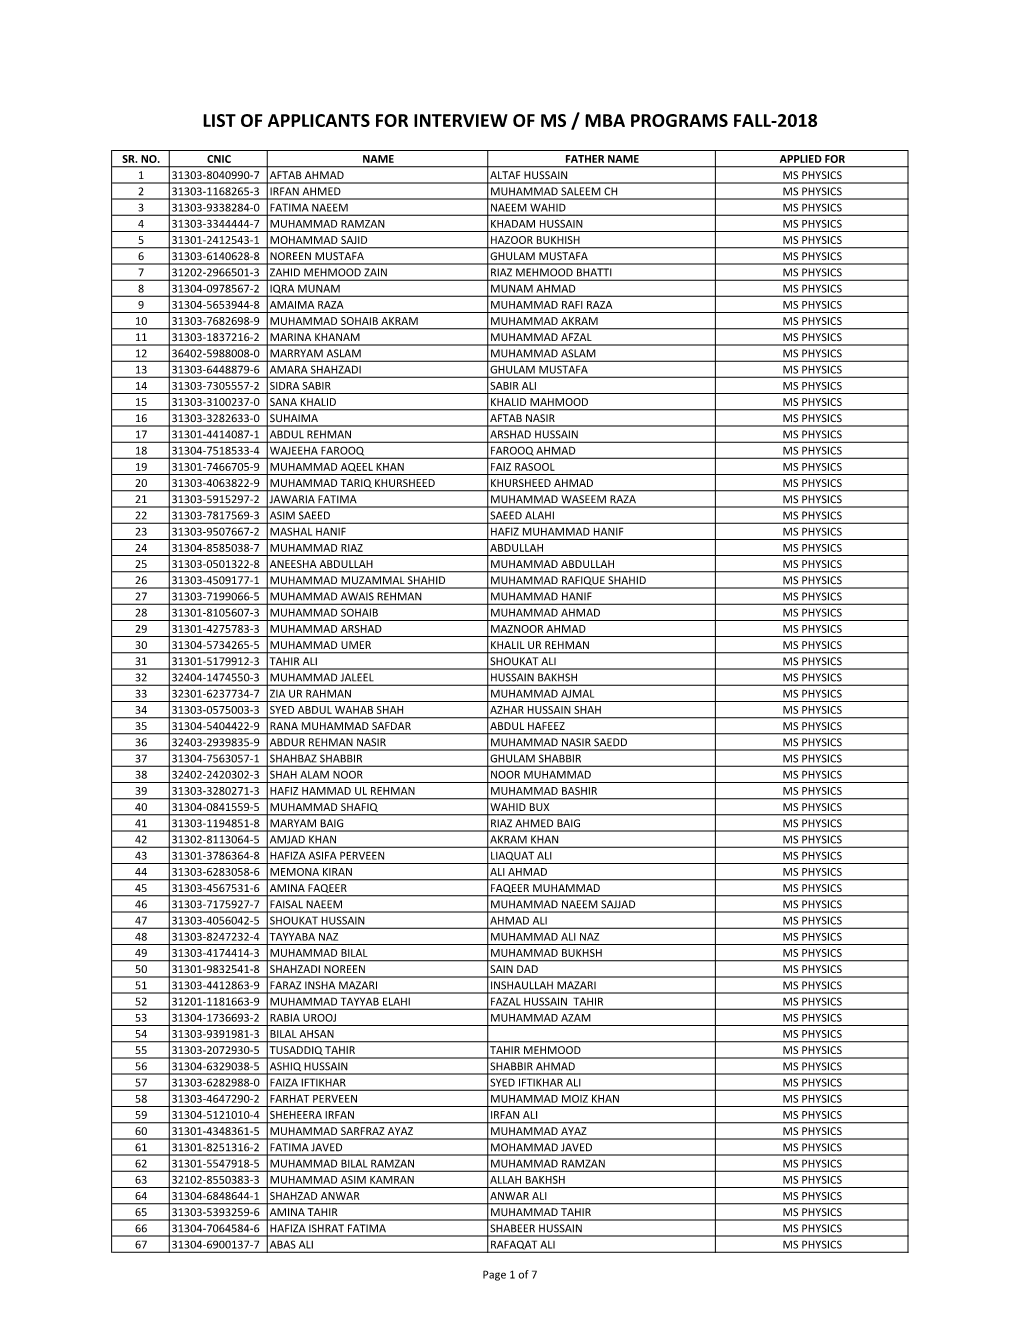 List of Applicants for Interview of Ms / Mba Programs Fall-2018